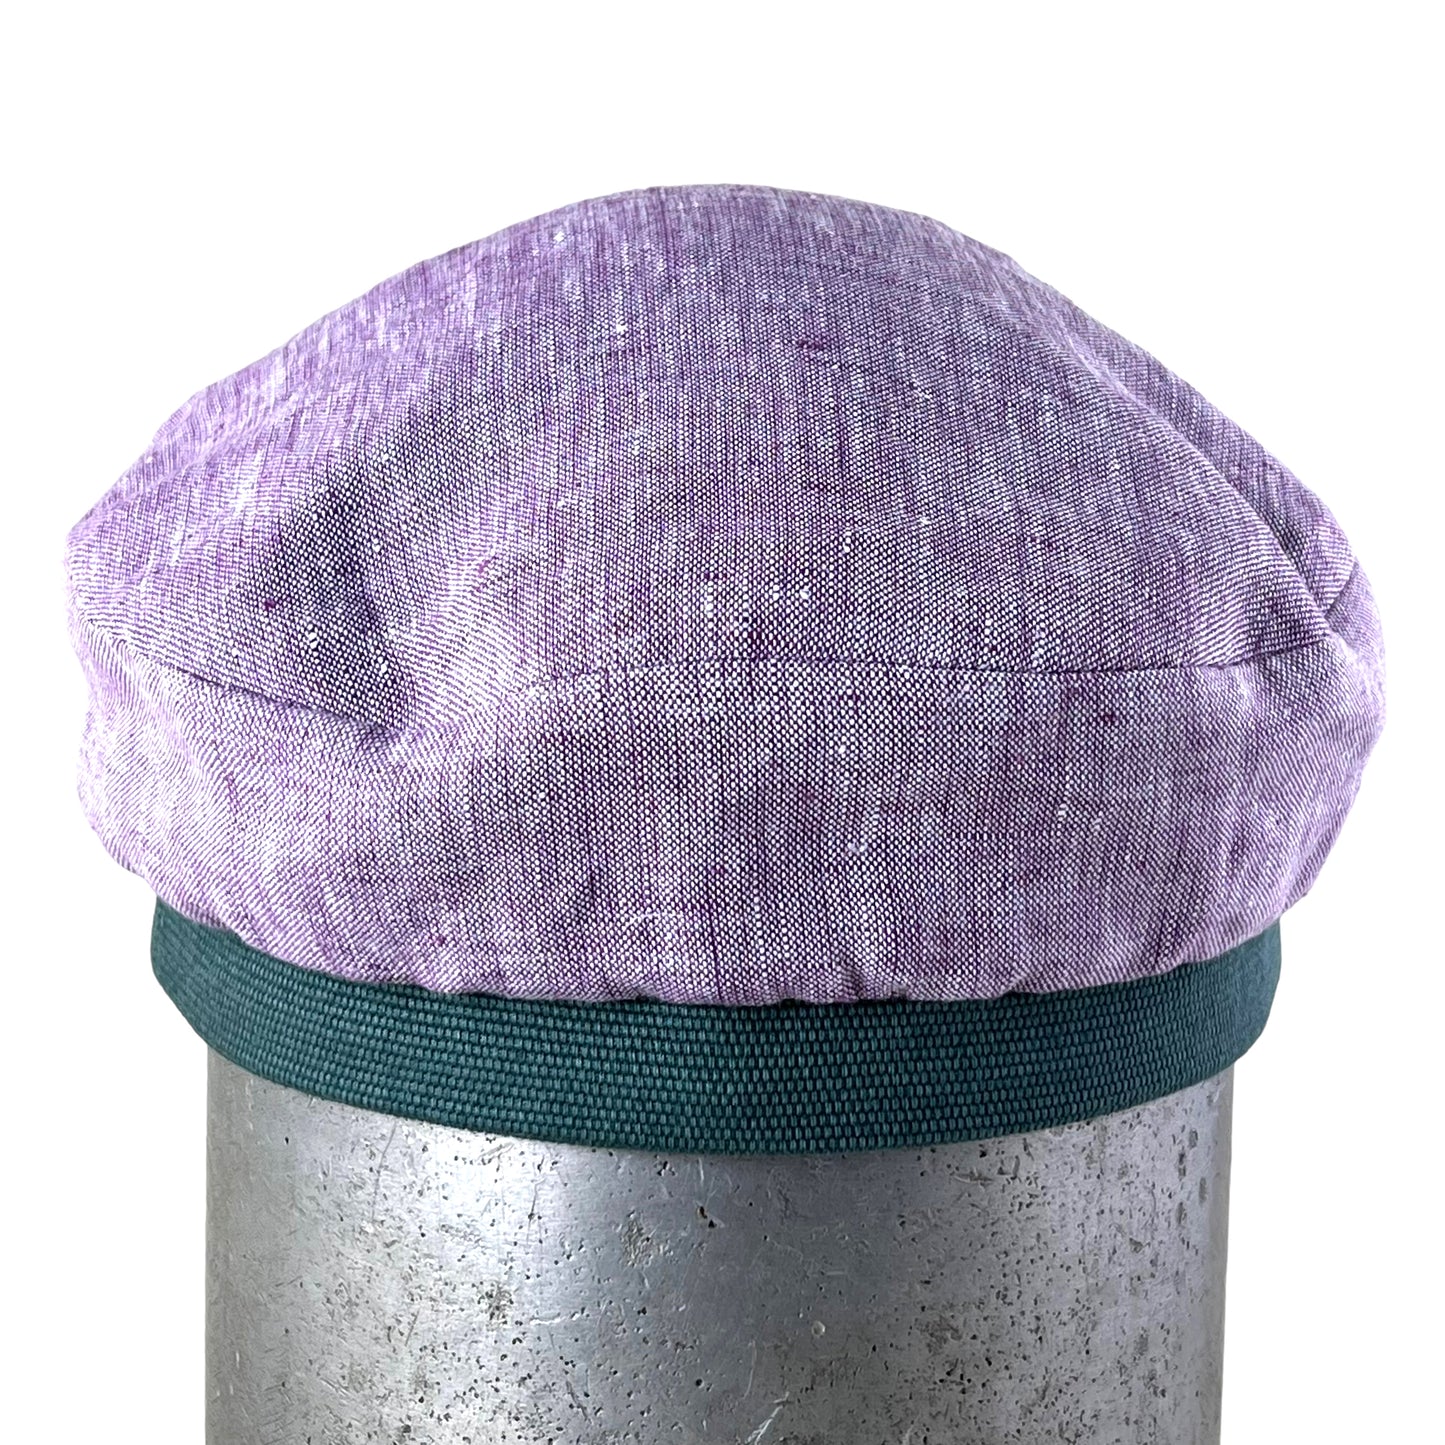 Lilac with Sage Green Band Burgundy Peak Robin Linen Cap Size Medium Small